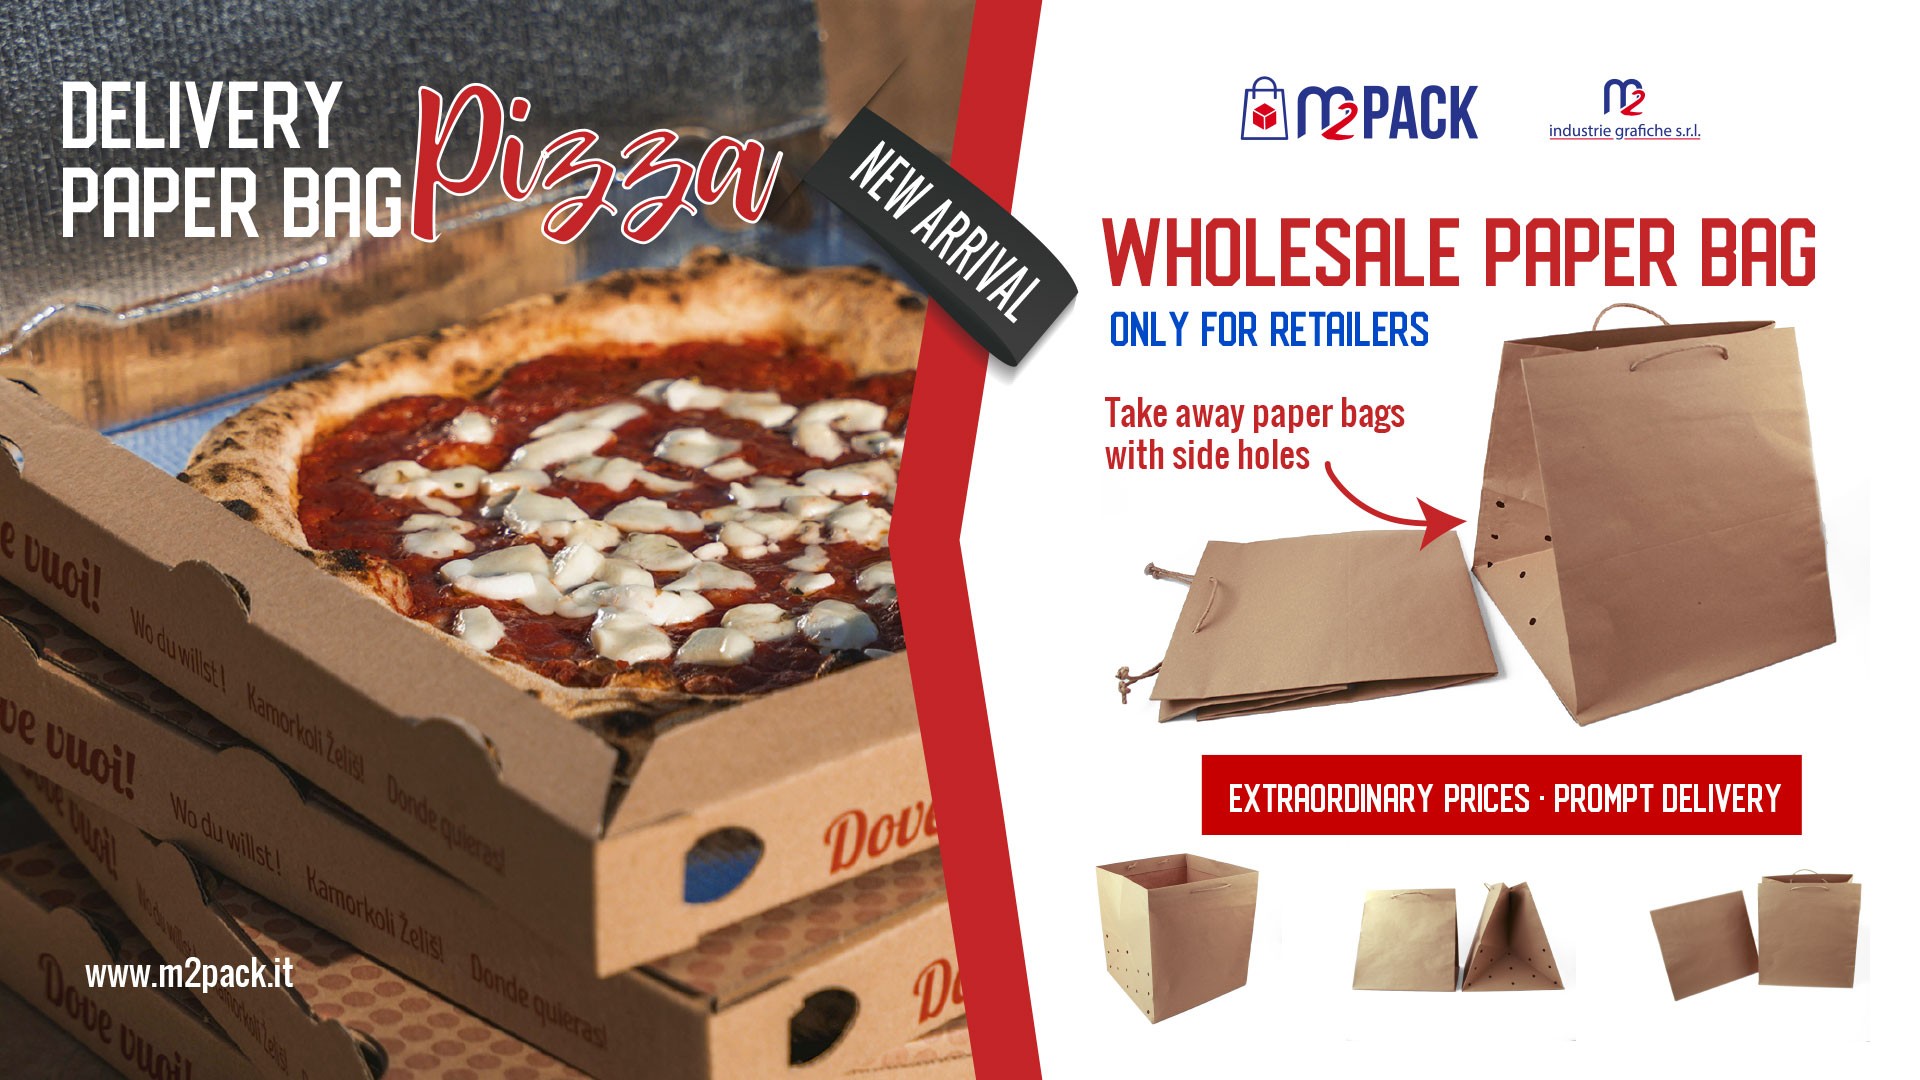 NEW ARRIVAL: TAKE AWAY PIZZA & FOOD PAPER BAG